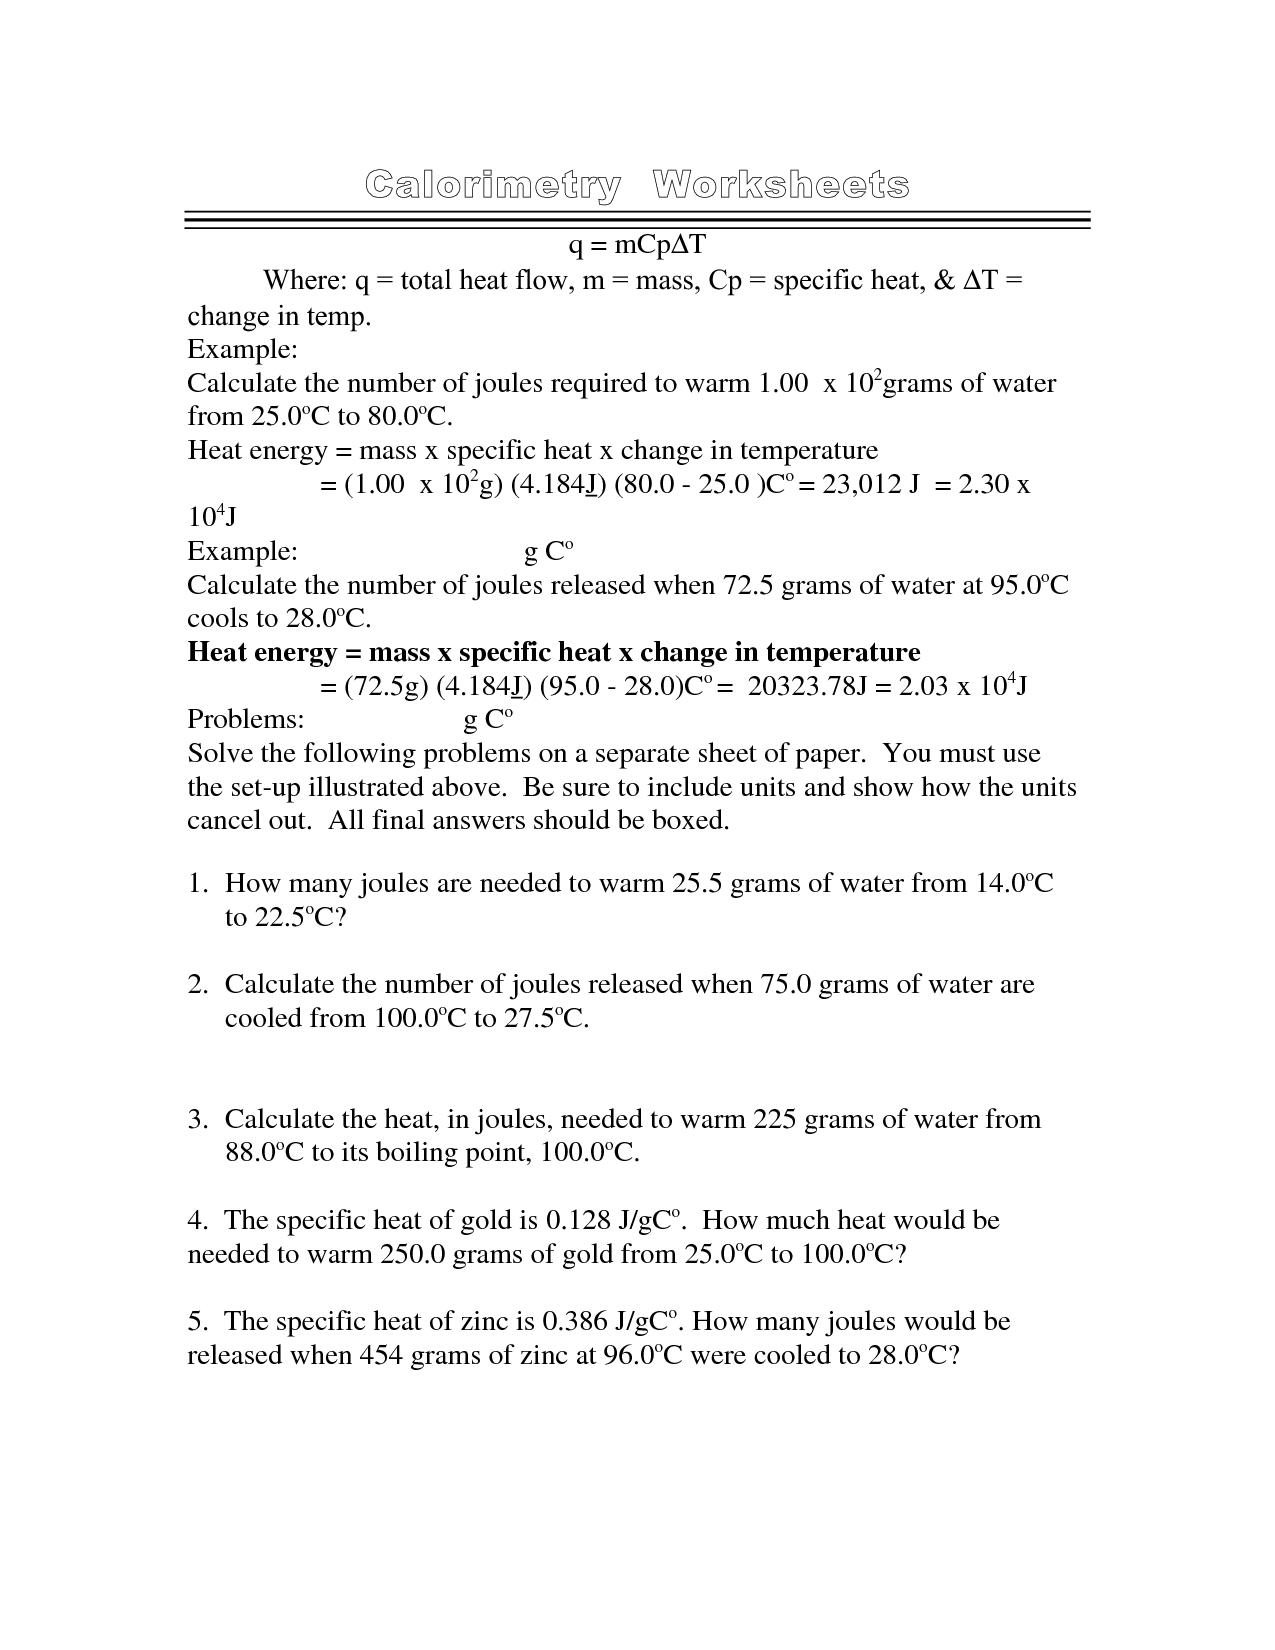 17-best-images-of-specific-heat-worksheet-with-key-specific-heat-worksheet-answers-specific